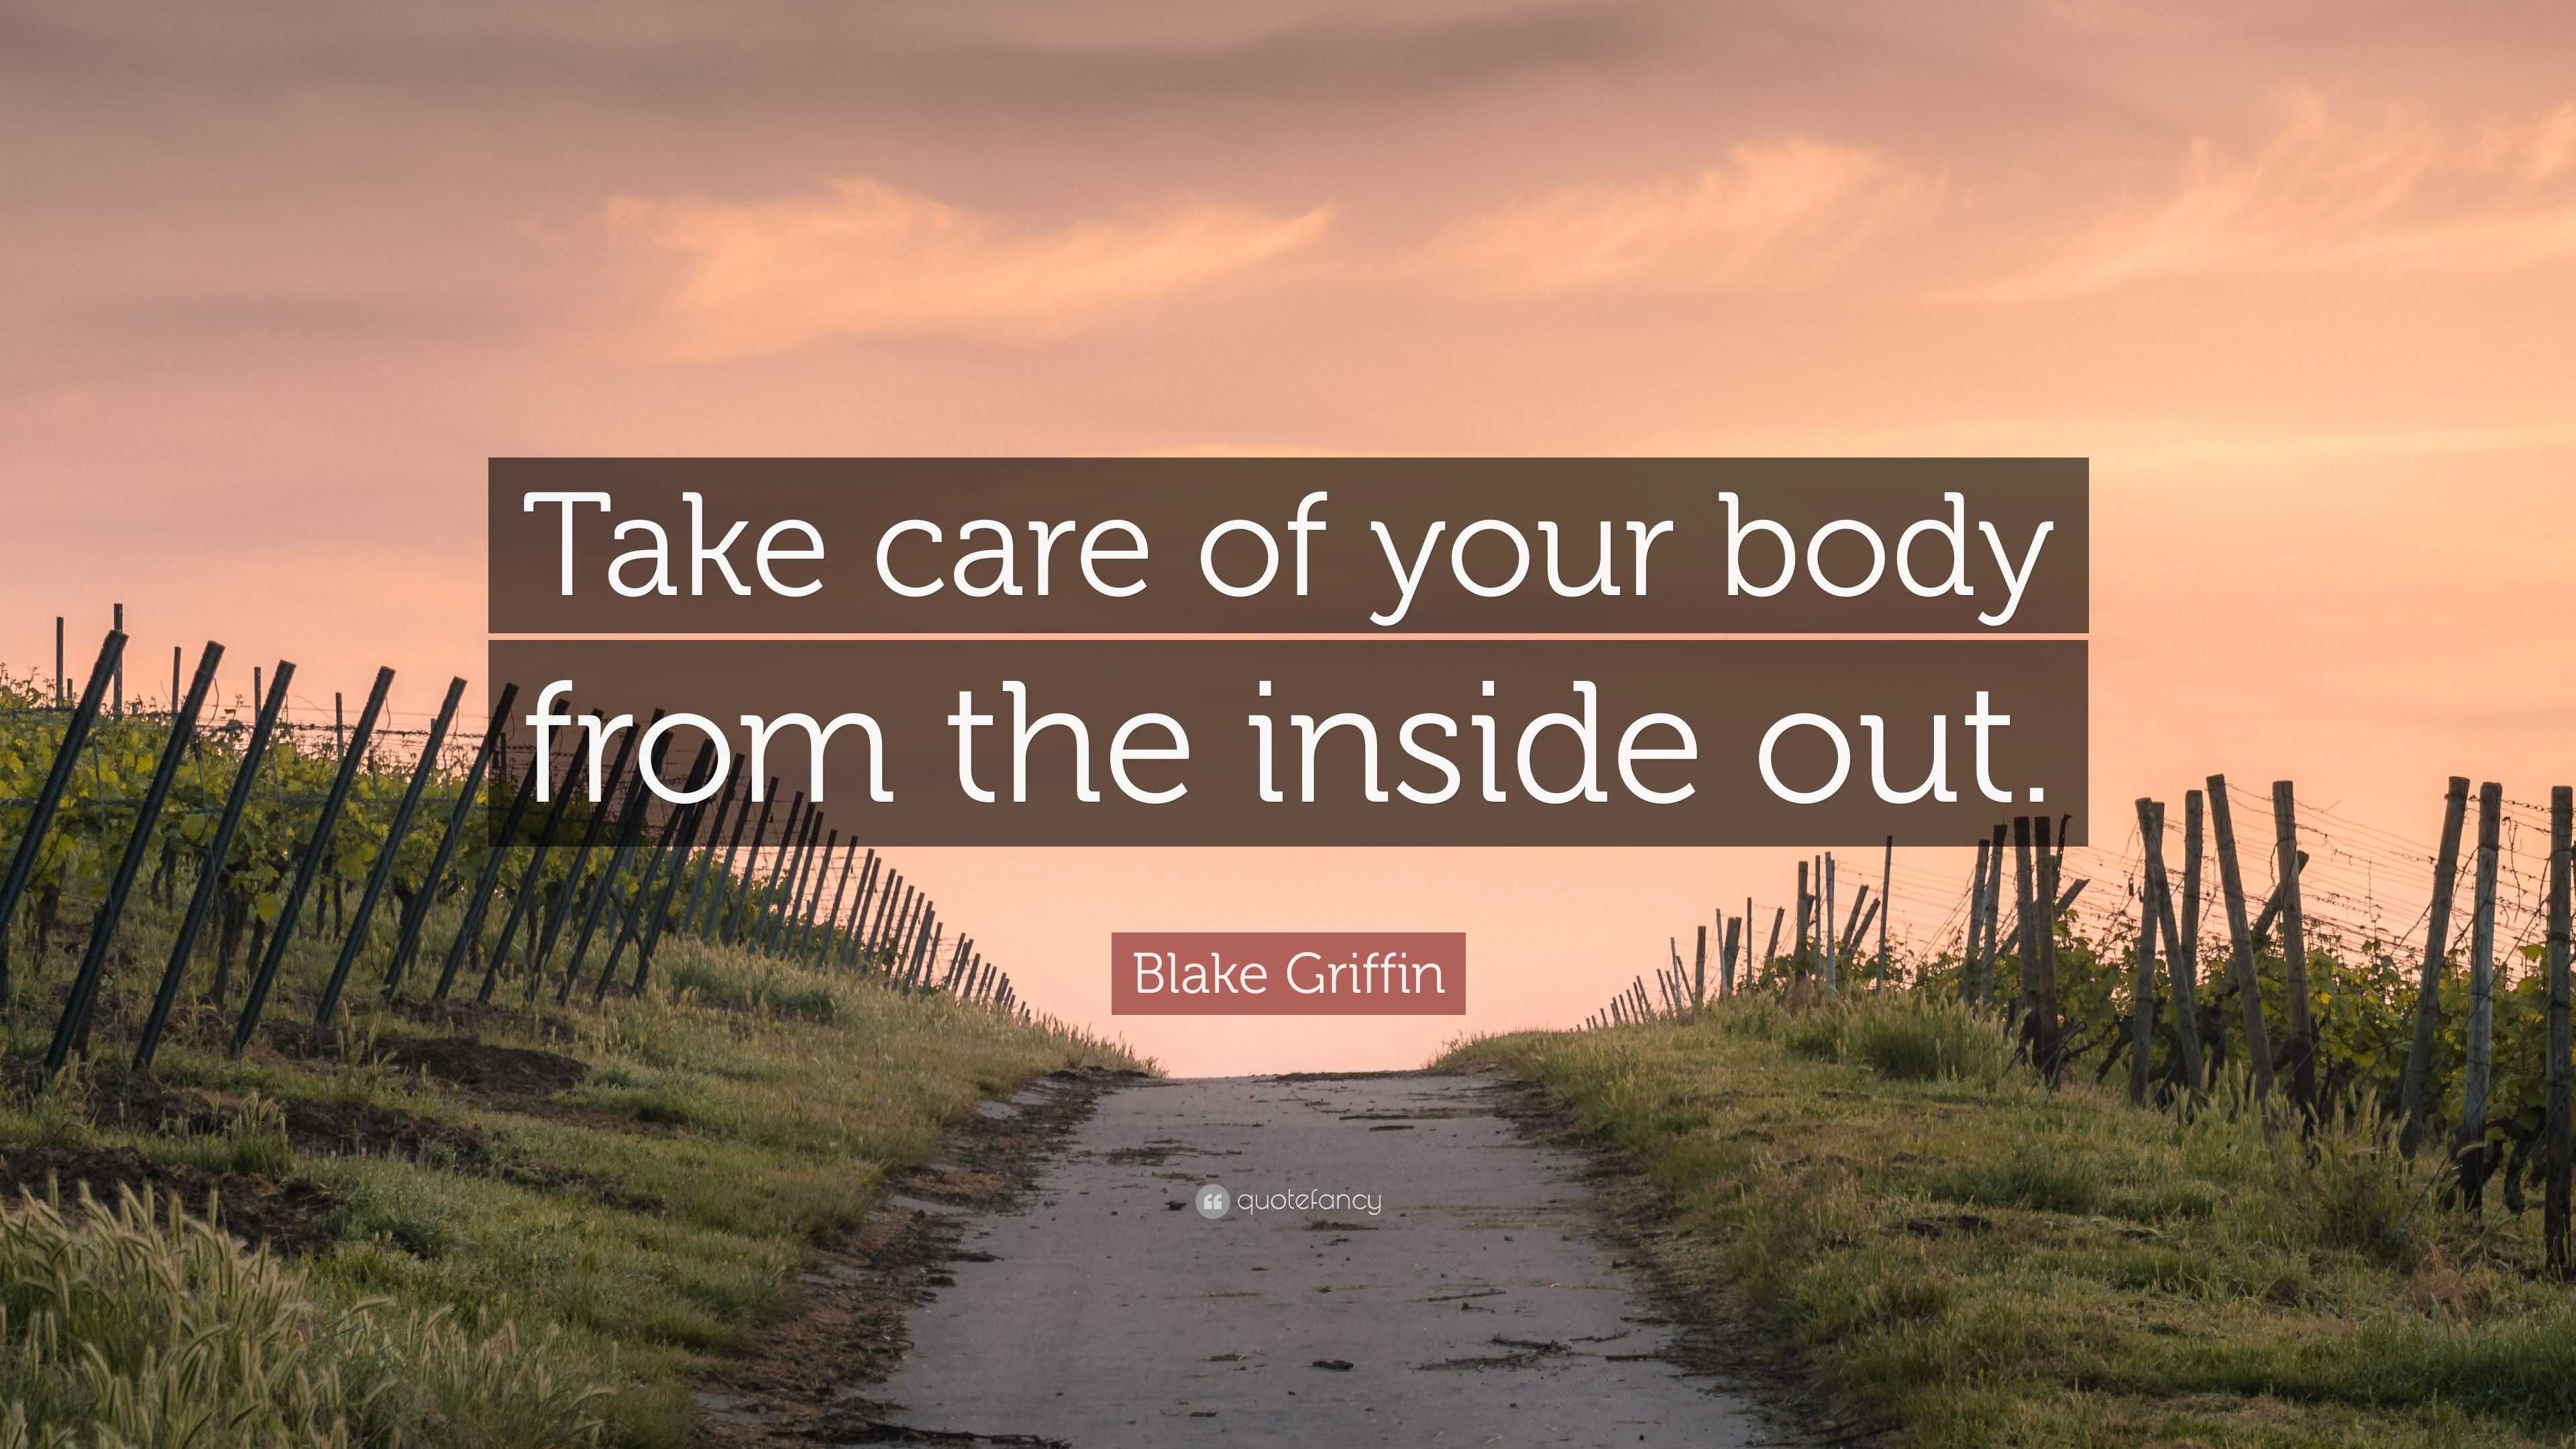 Blake Griffin Quote: “Take care of your body from the inside out.”